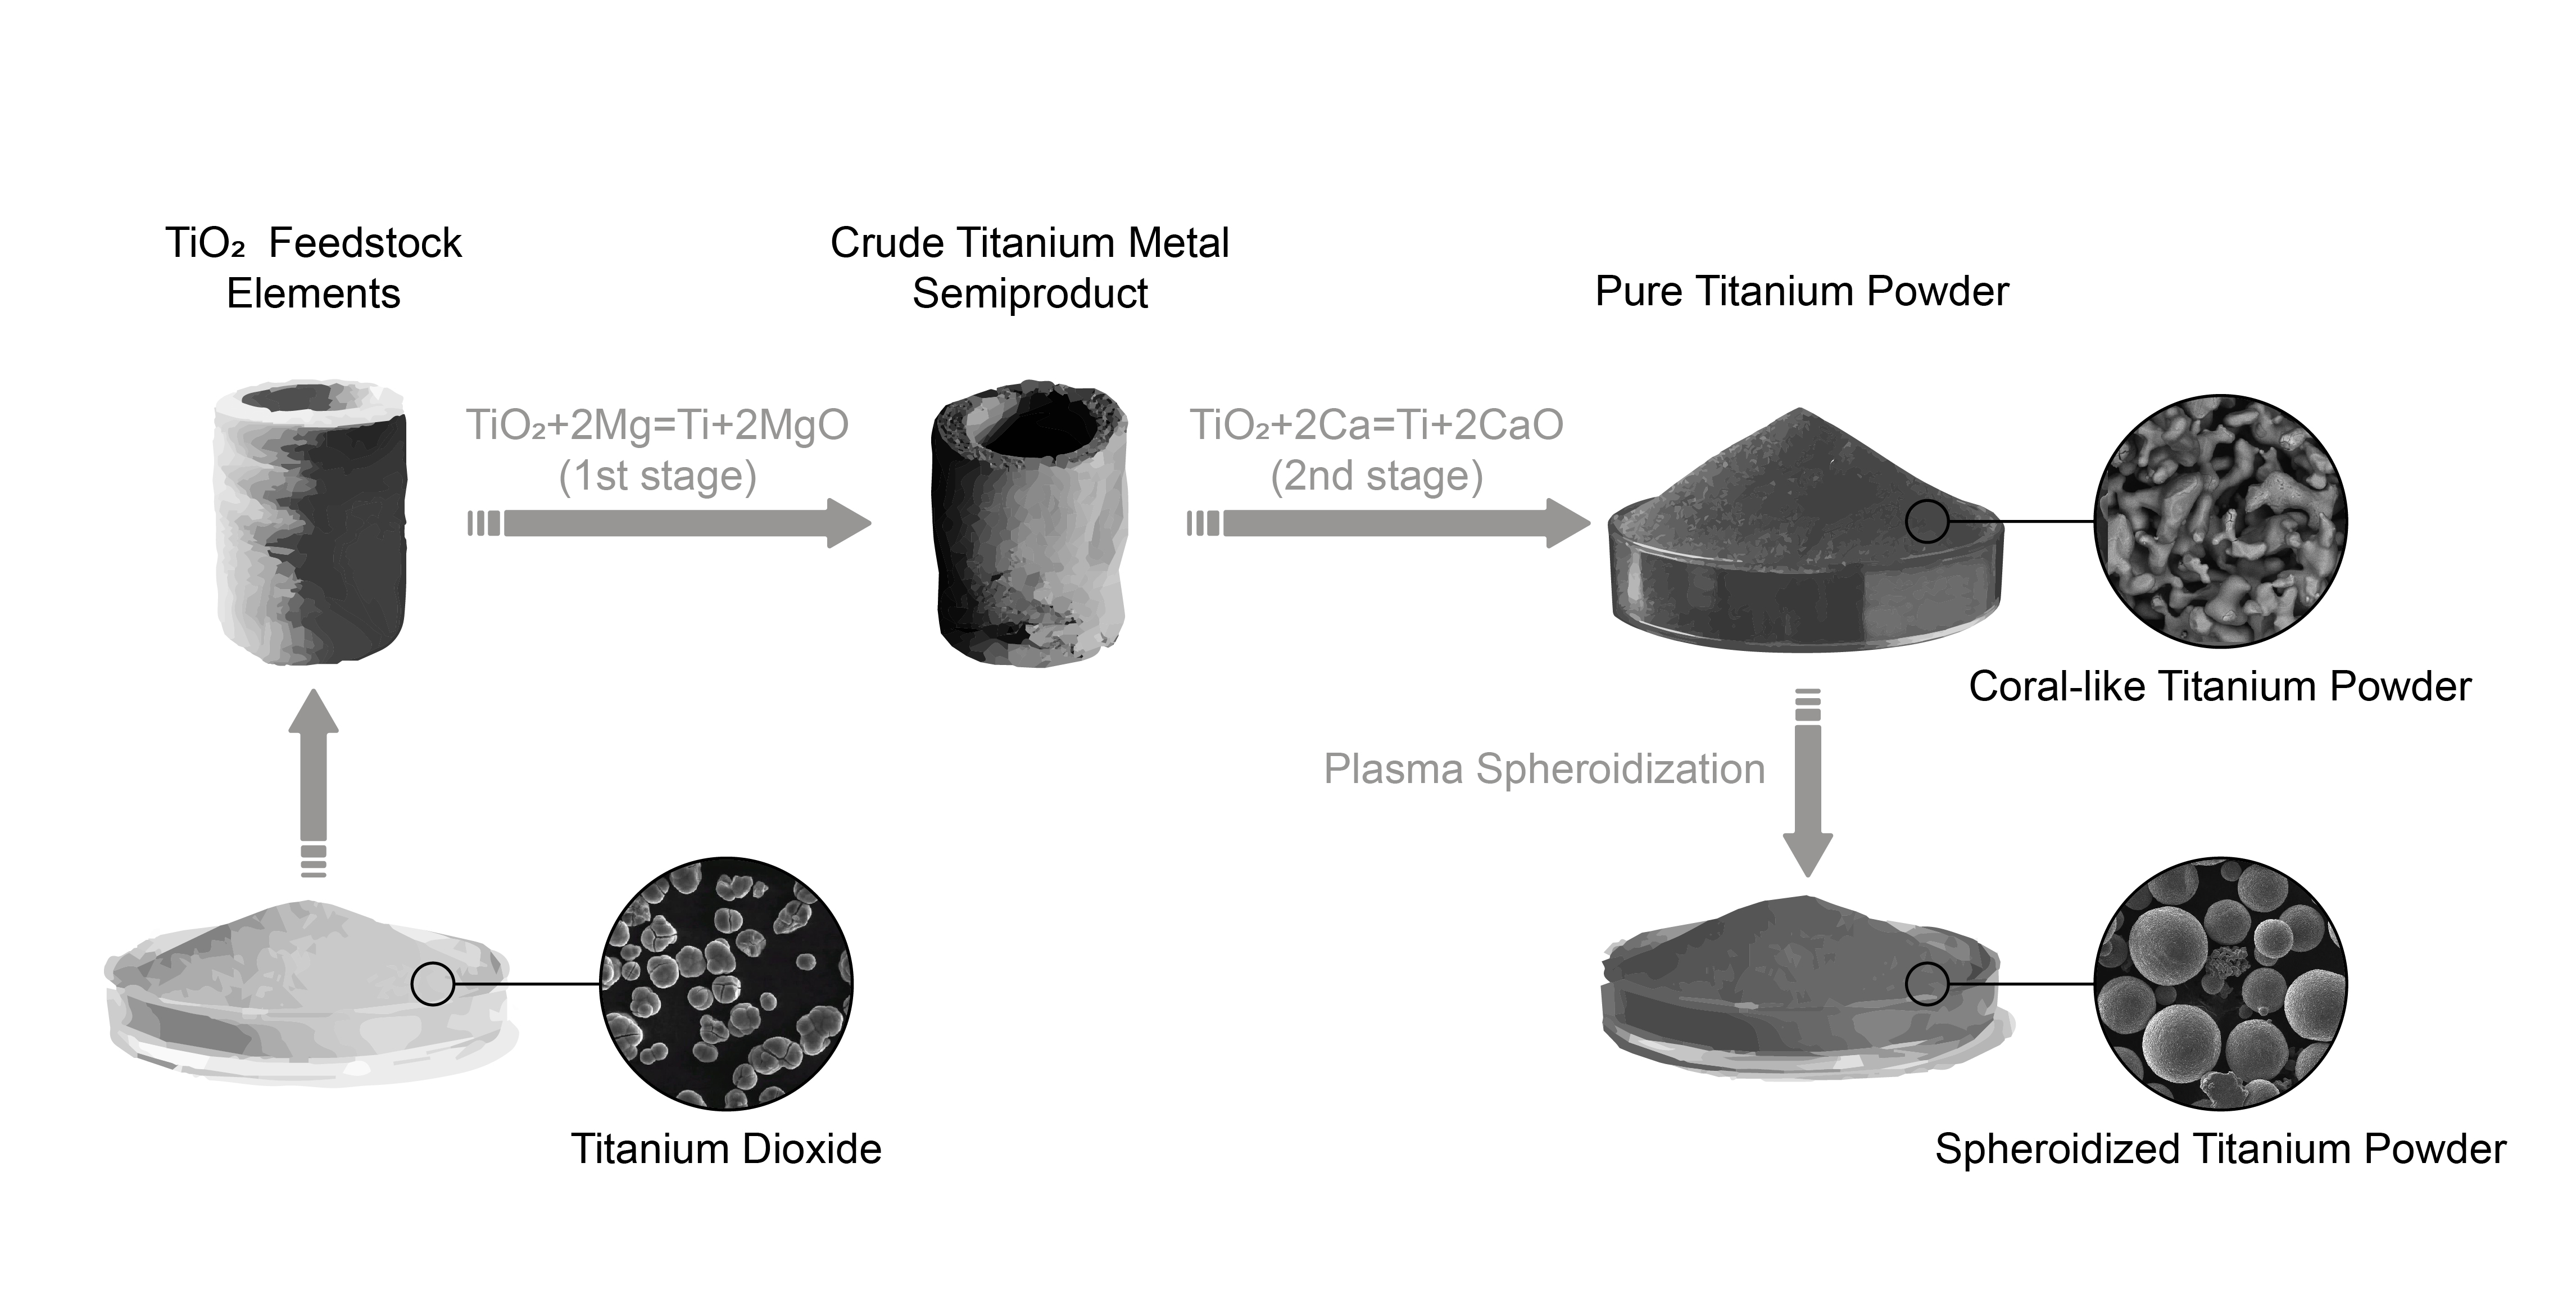 Development of a technology to produce titanium powder with a low carbon footprint